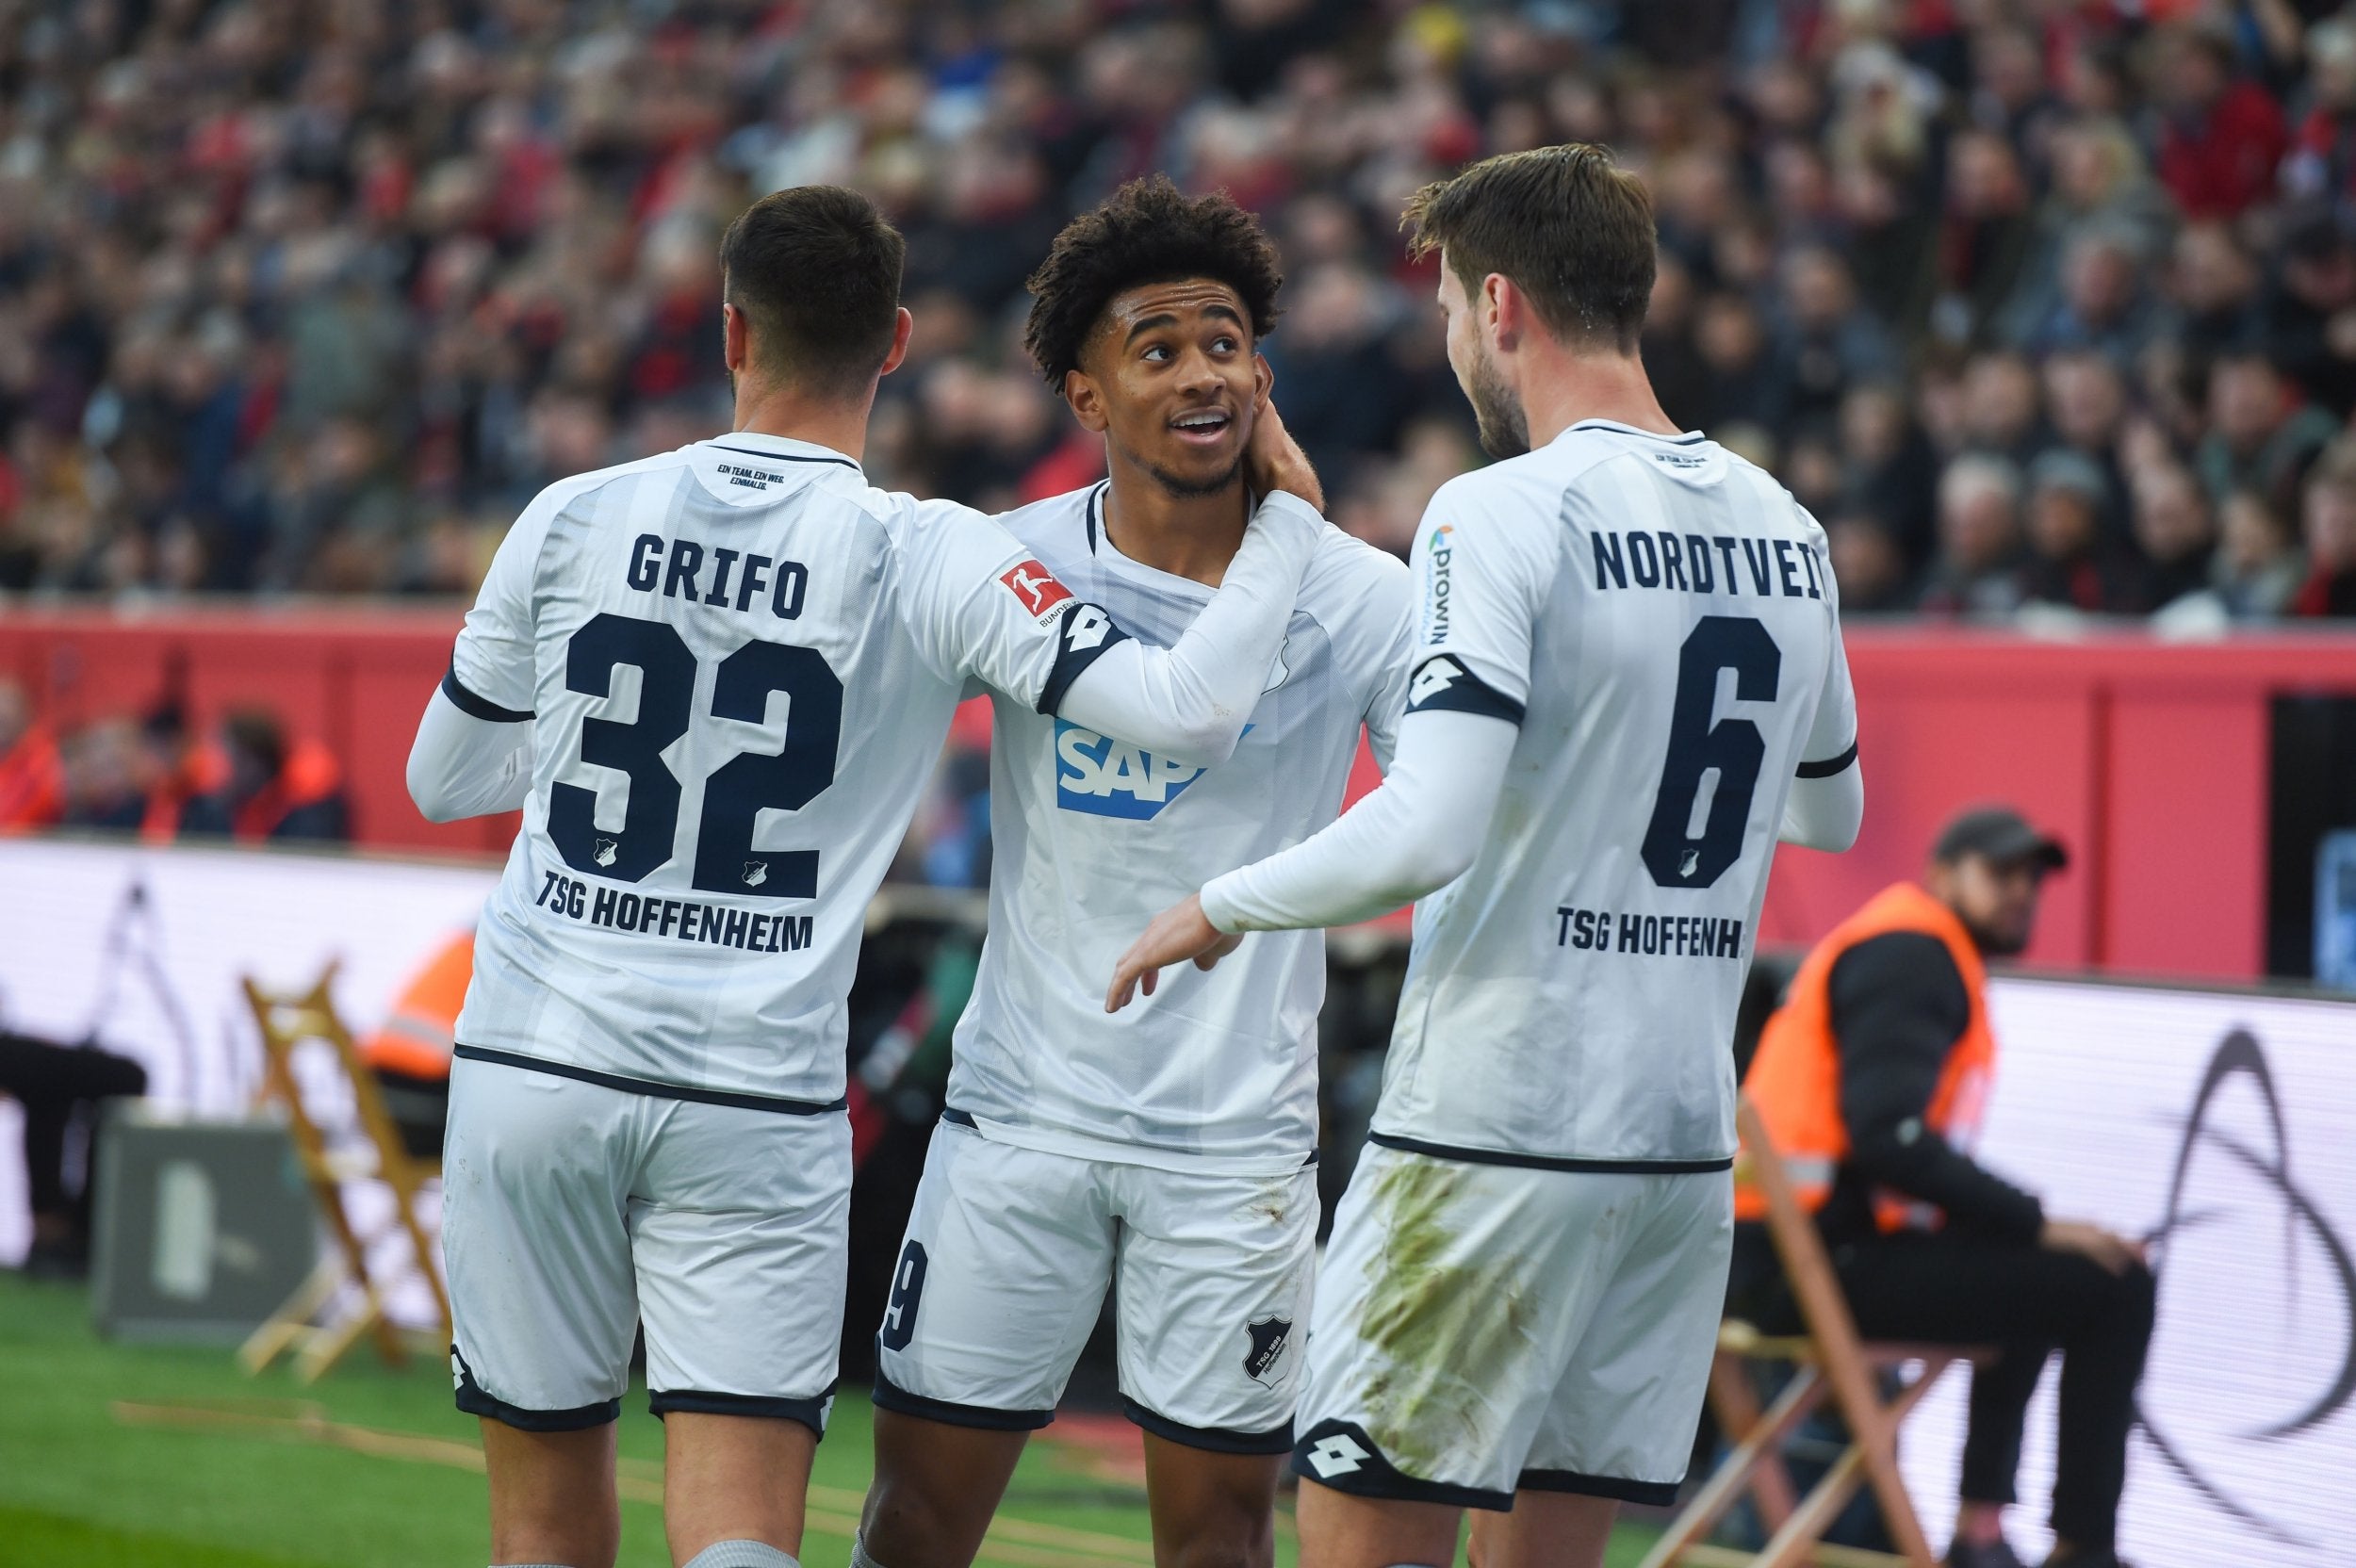 Nelson is averaging a Bundesliga goal every 63 minutes